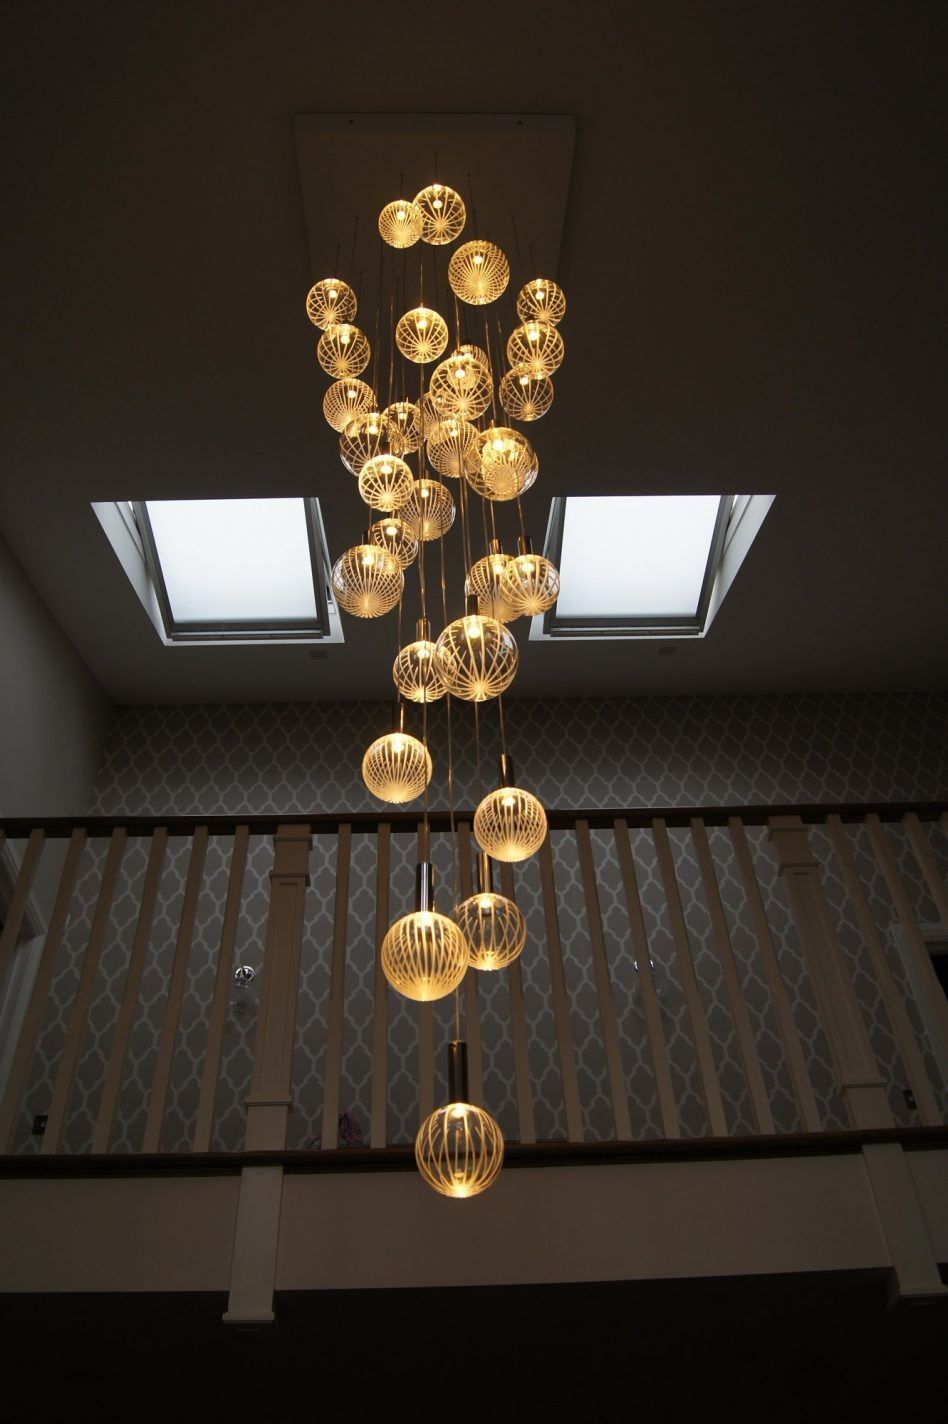 Amazing Of Contemporary Large Chandeliers Fabulous Crystal Intended For Contemporary Large Chandeliers (View 5 of 15)